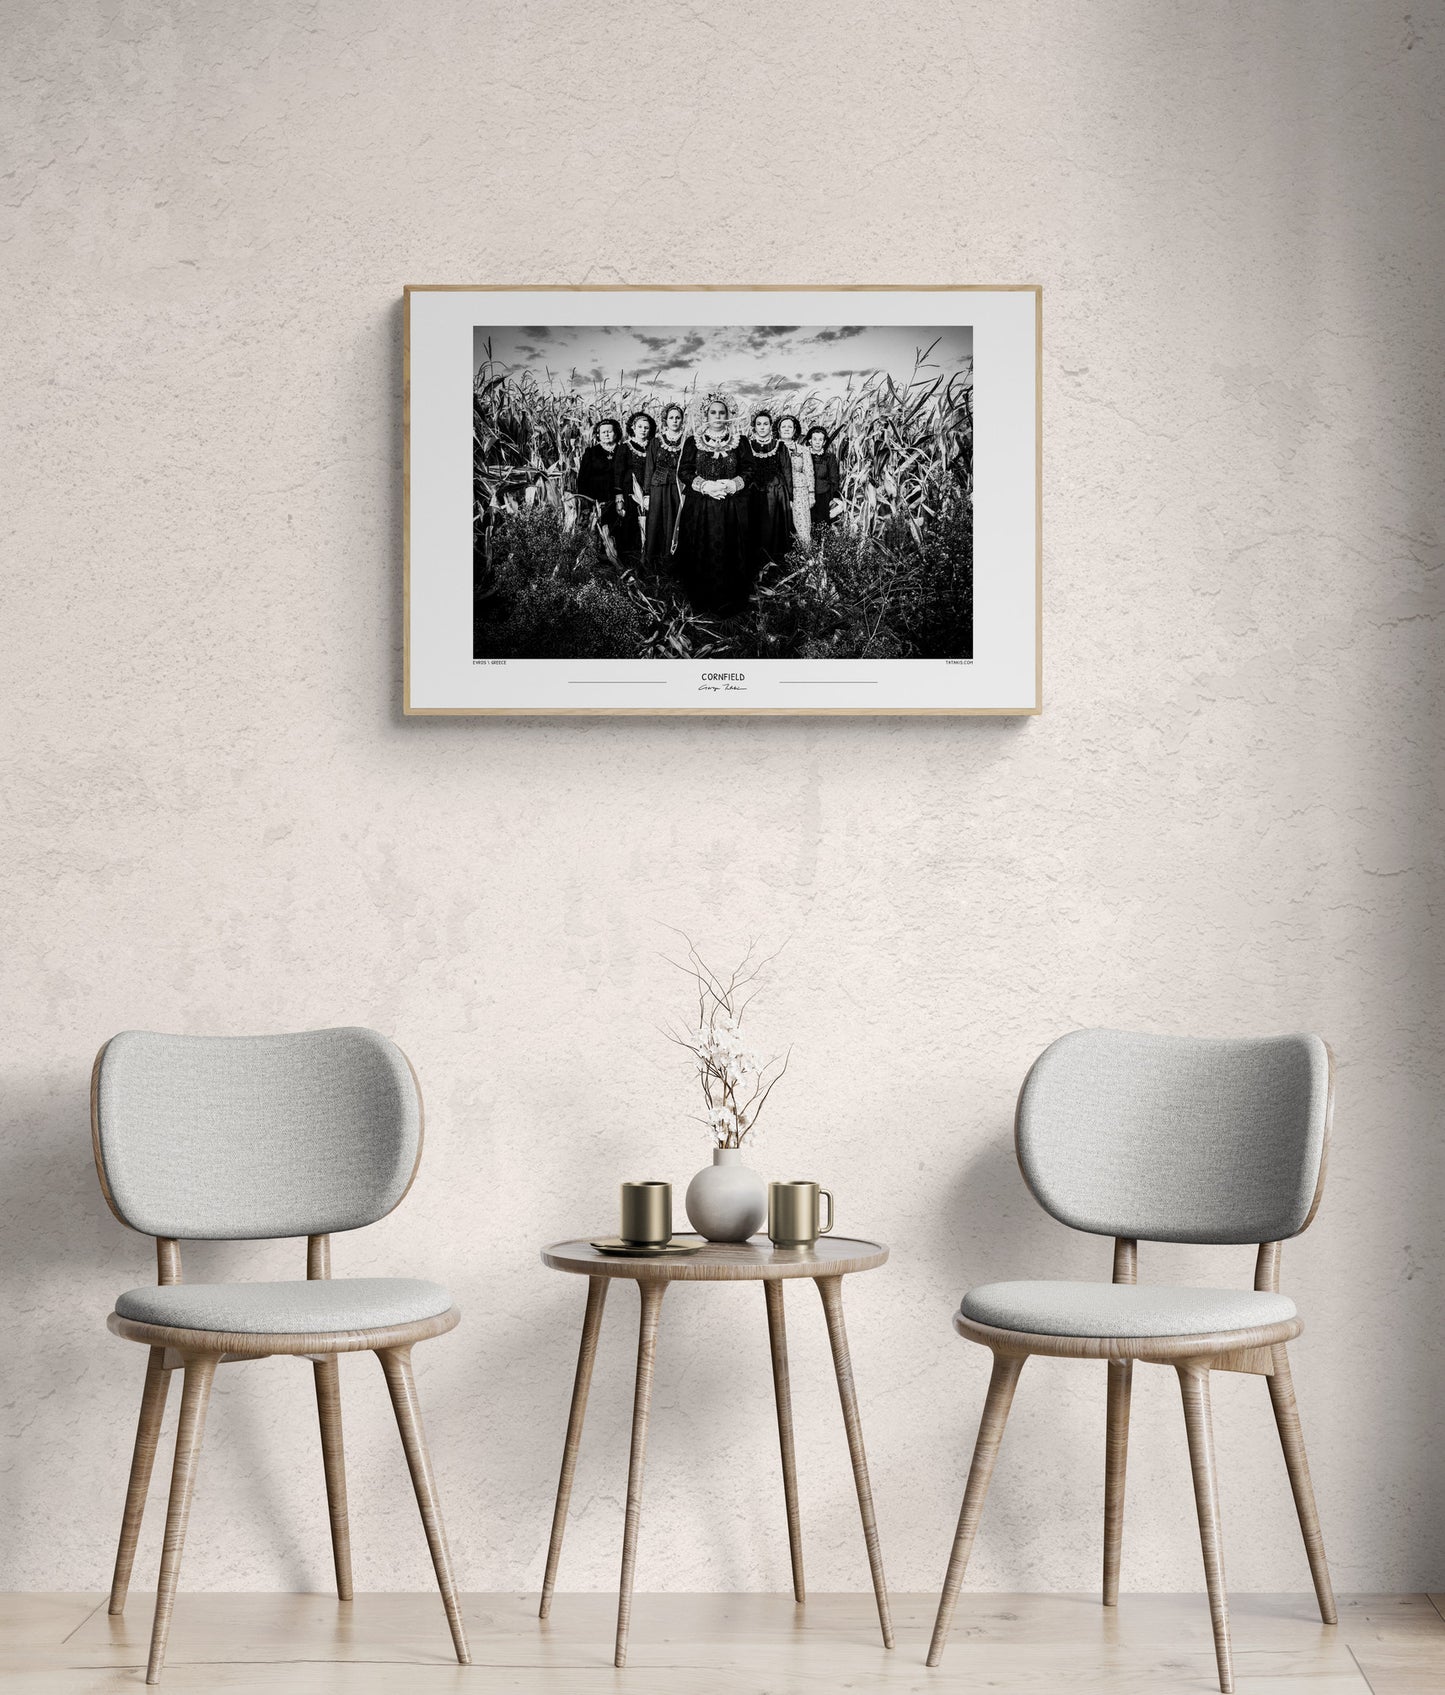 Black and White Photo Wall Art Poster from Greece | Costumes in a Cornfield, Nea Vyssa, Evros, Thrace, by George Tatakis - chic room